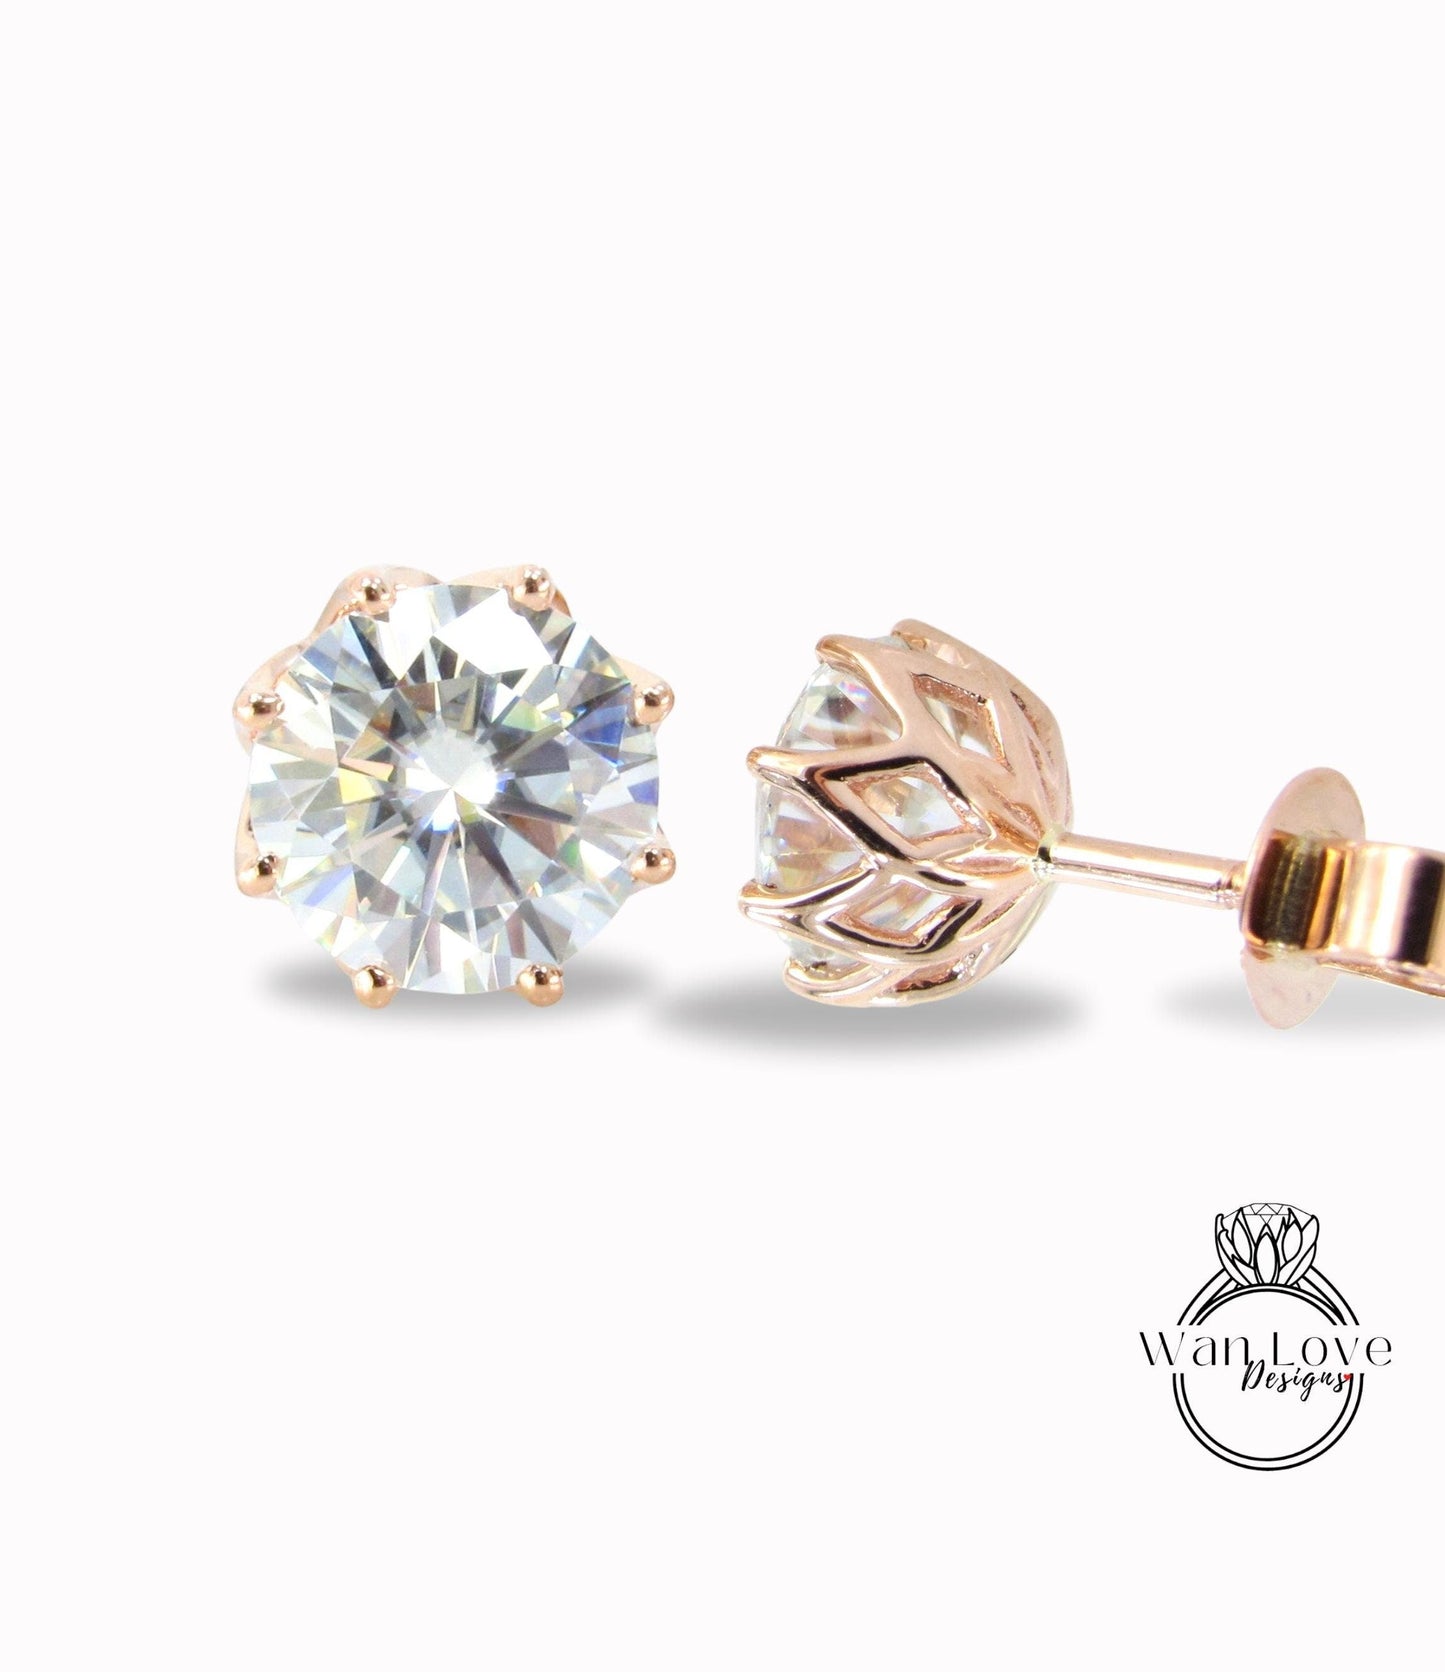 Moissanite Earrings 2ct miossanite studs 8 Prong Screw Back moissanite earrings Rose Gold moissanite earrings Anniversary Gift for her Ready Wan Love Designs